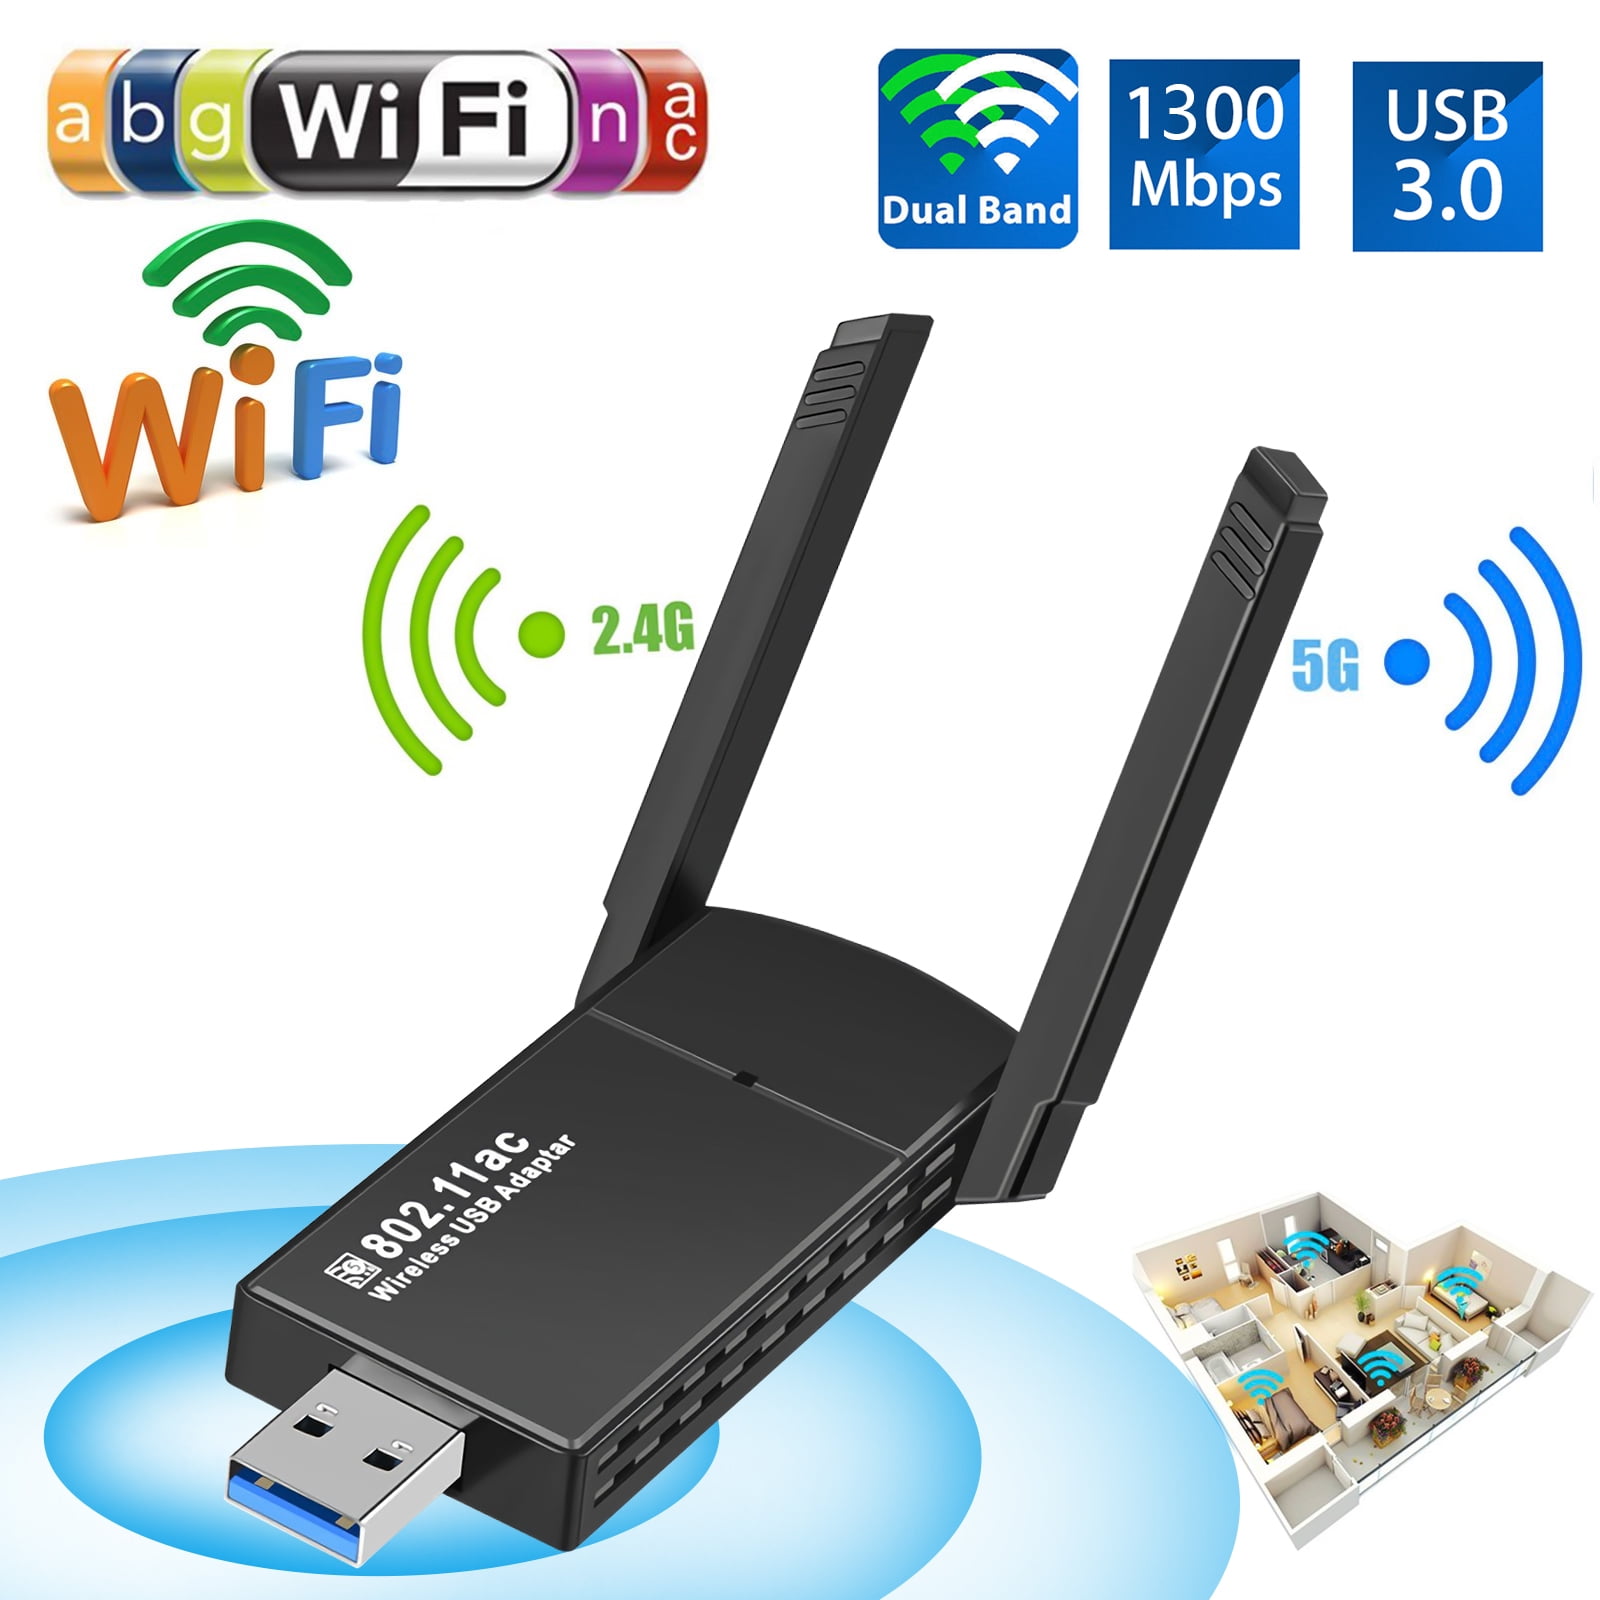 TSV AC1300 USB WiFi Adapter for PC, Wireless Network Adapter for Desktop with Band 2.4G/5G High Gain Antenna, USB3.0 WiFi Dongle Supports Windows 11/10/8.1/8/7/XP, 10.9-10.14 - Walmart.com